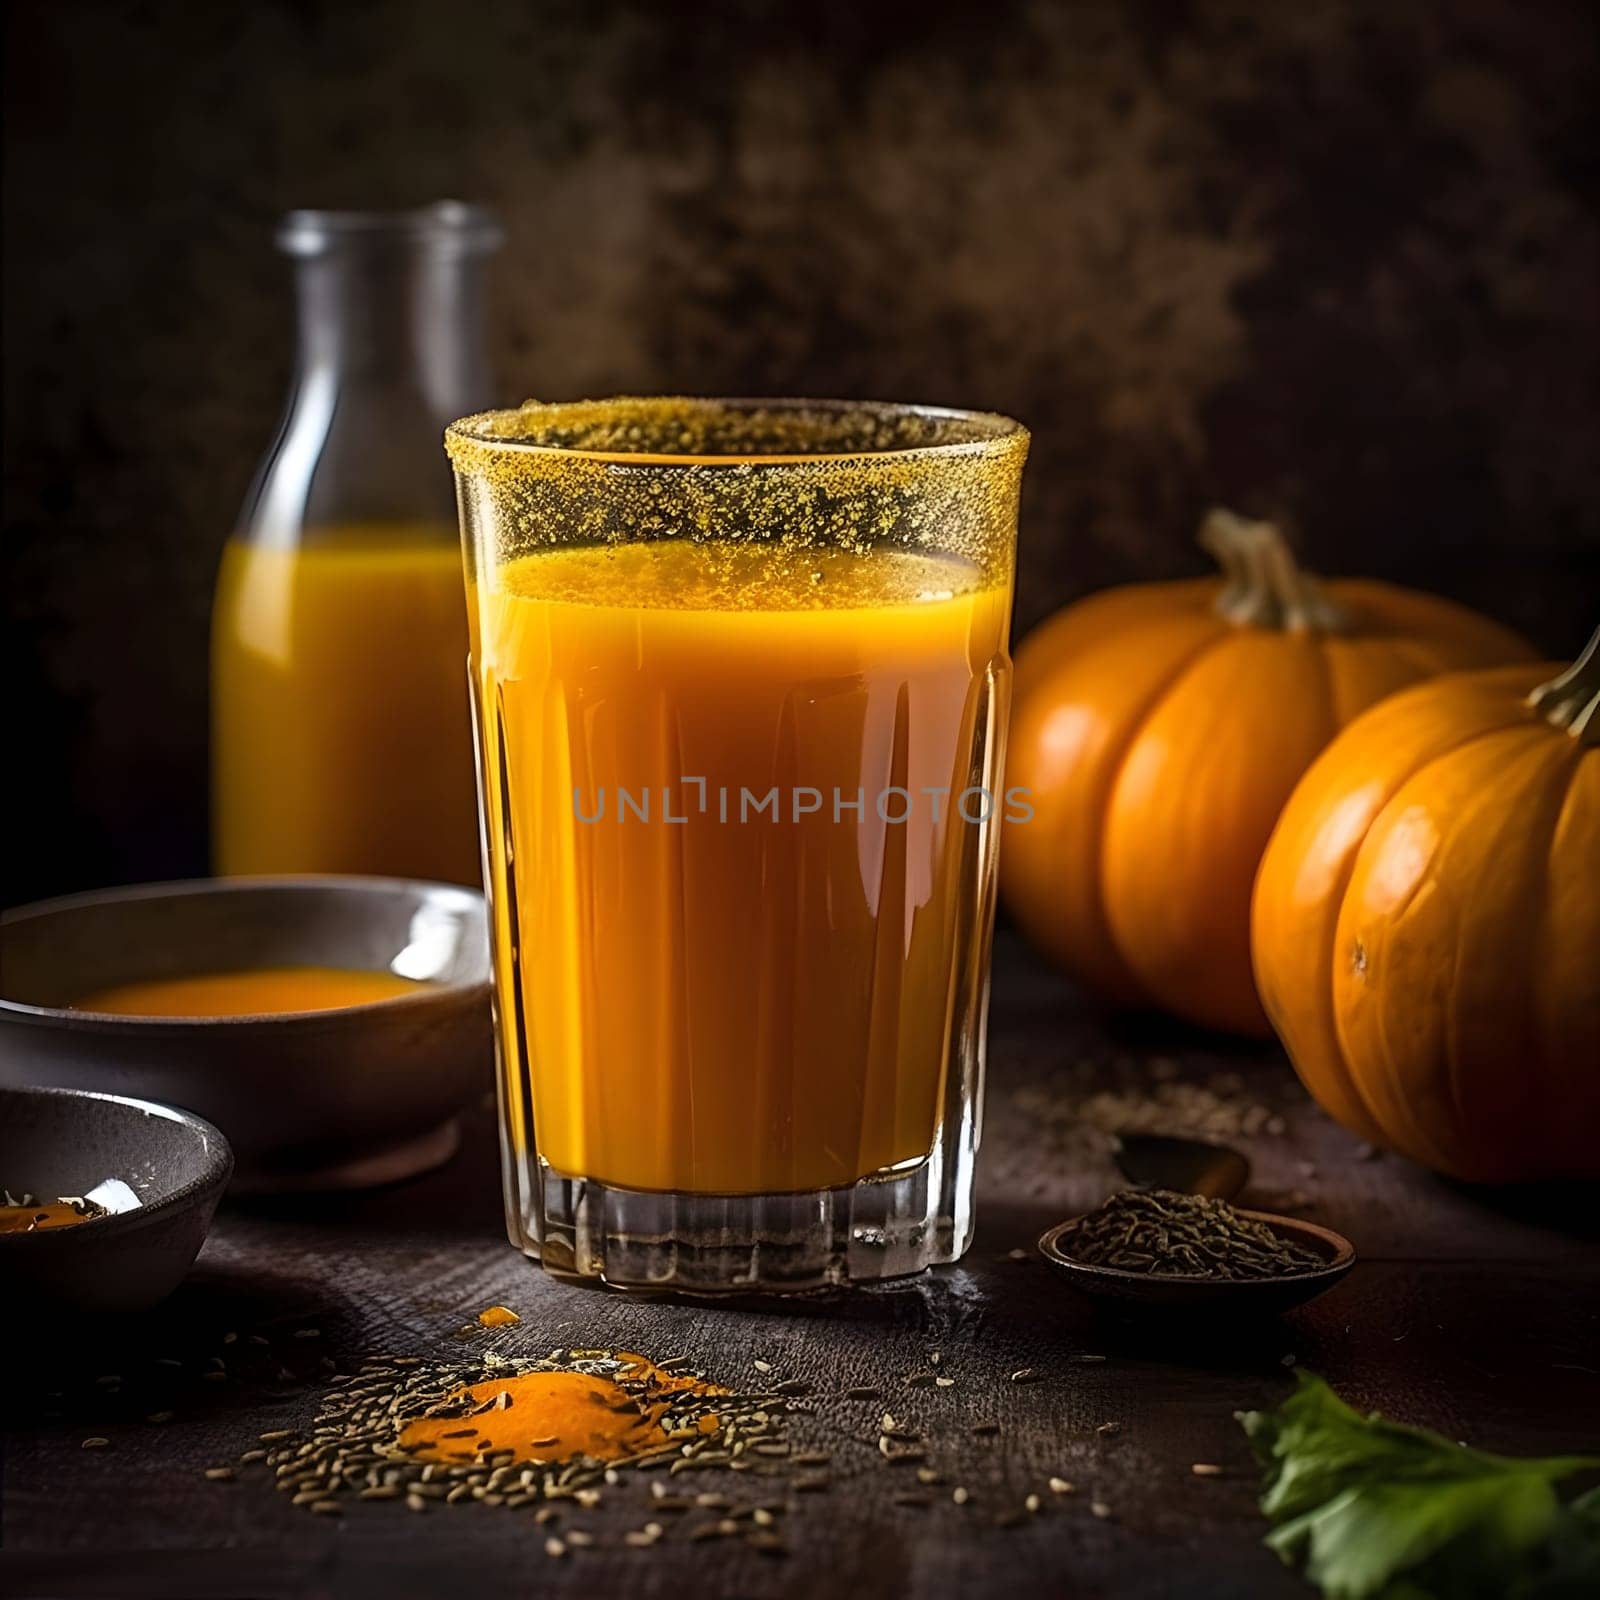 Pumpkin juice in a glass and pumpkin on a dark background. Pumpkin as a dish of thanksgiving for the harvest. An atmosphere of joy and celebration.